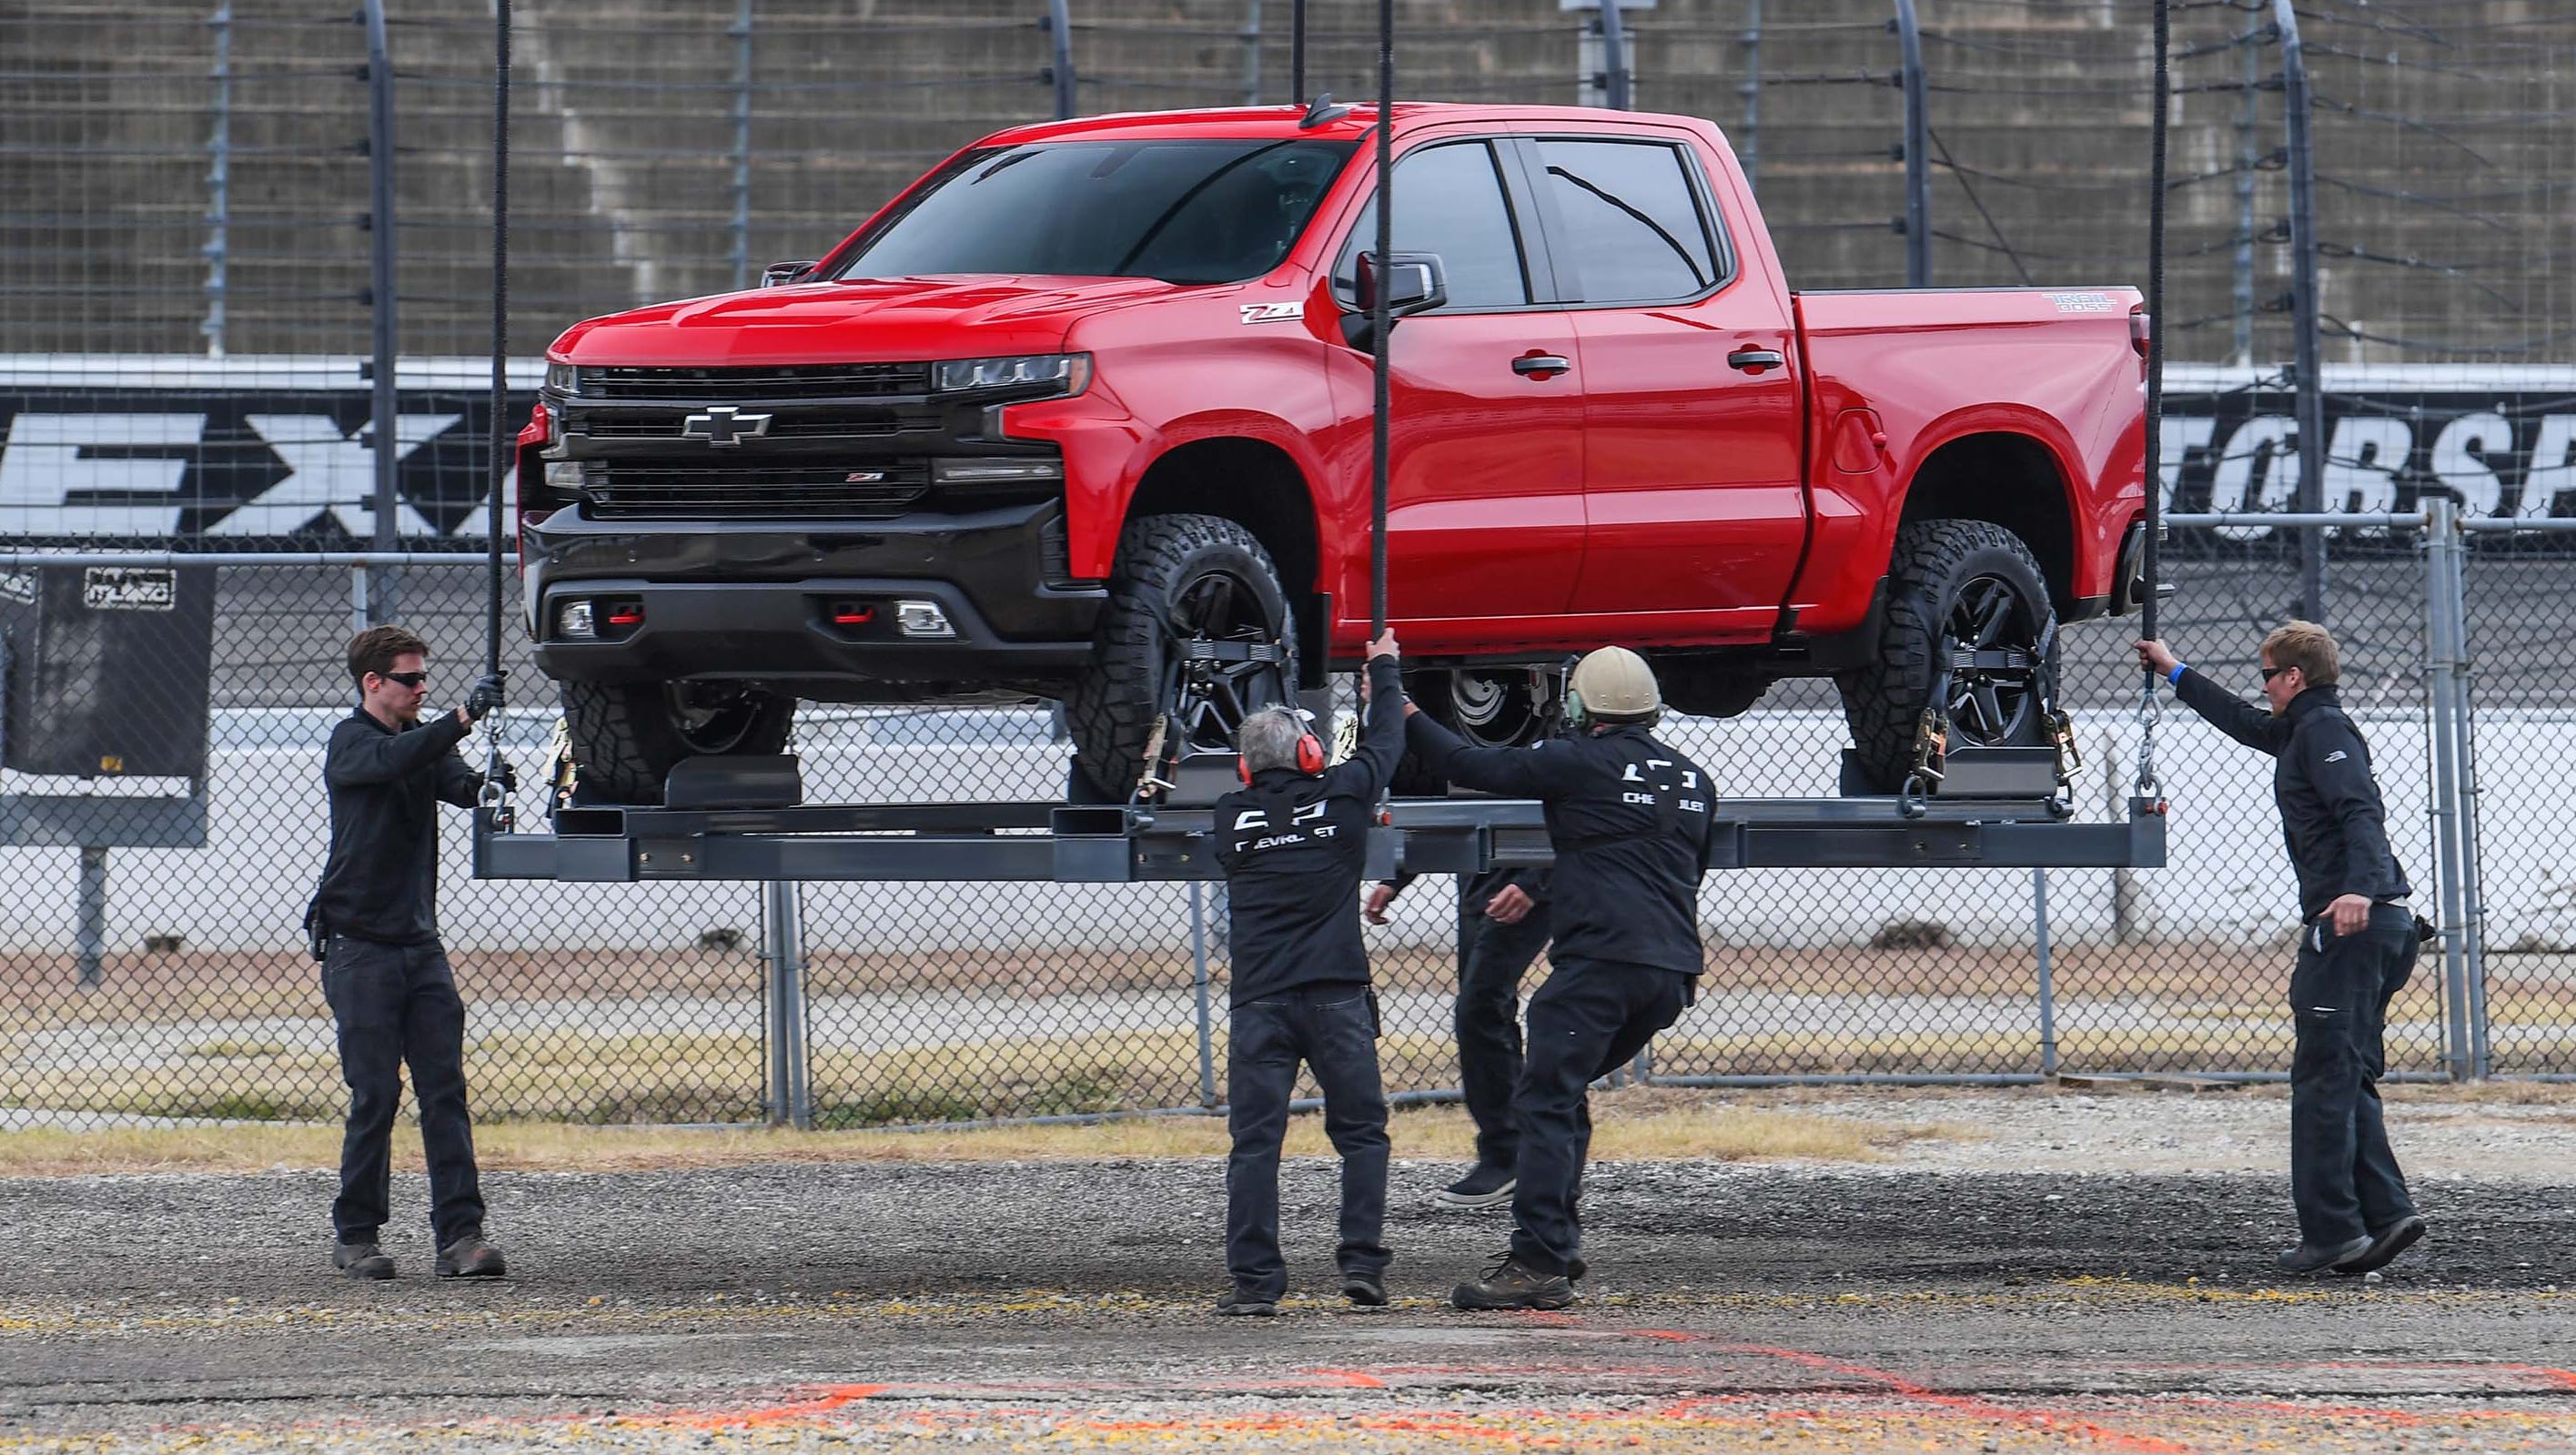 Seen for the first time, the all-new, 2019 Chevy Silverado was lowered by chopper onto the grounds of Chevy Motor Speedway in Dallas, Texas where it was removed from its harness - and paraded before Chevy customers.